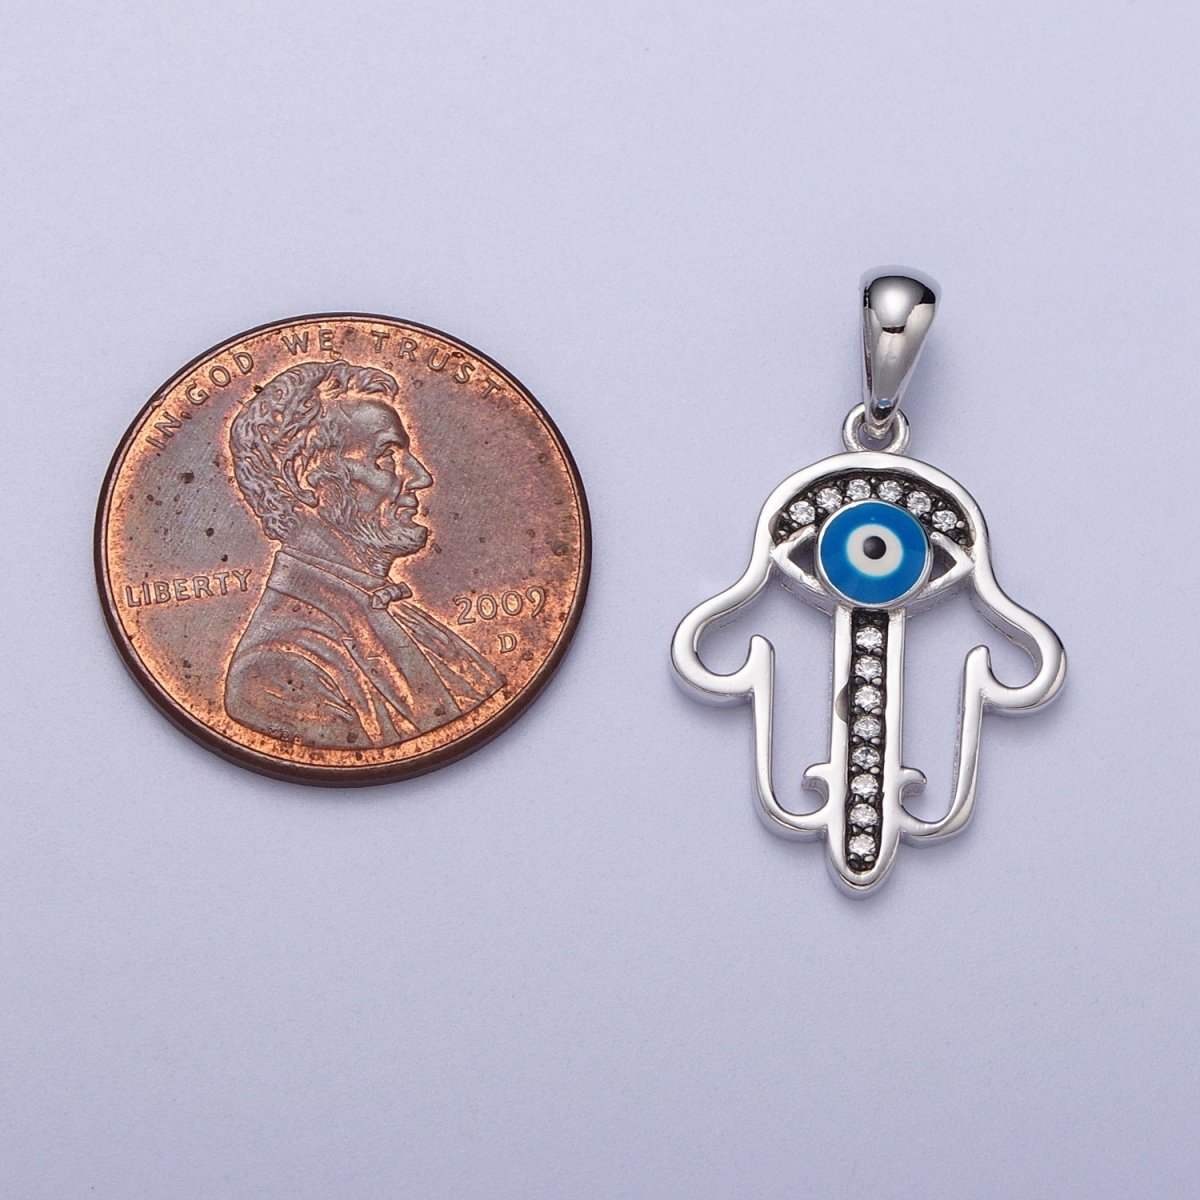 S925 Sterling Silver Hamsa Pendant Hand of Fatima Charm Evil Eye Amulet Religious Protection Pendant Dainty Silver Ancient Symbol SL-407 - DLUXCA